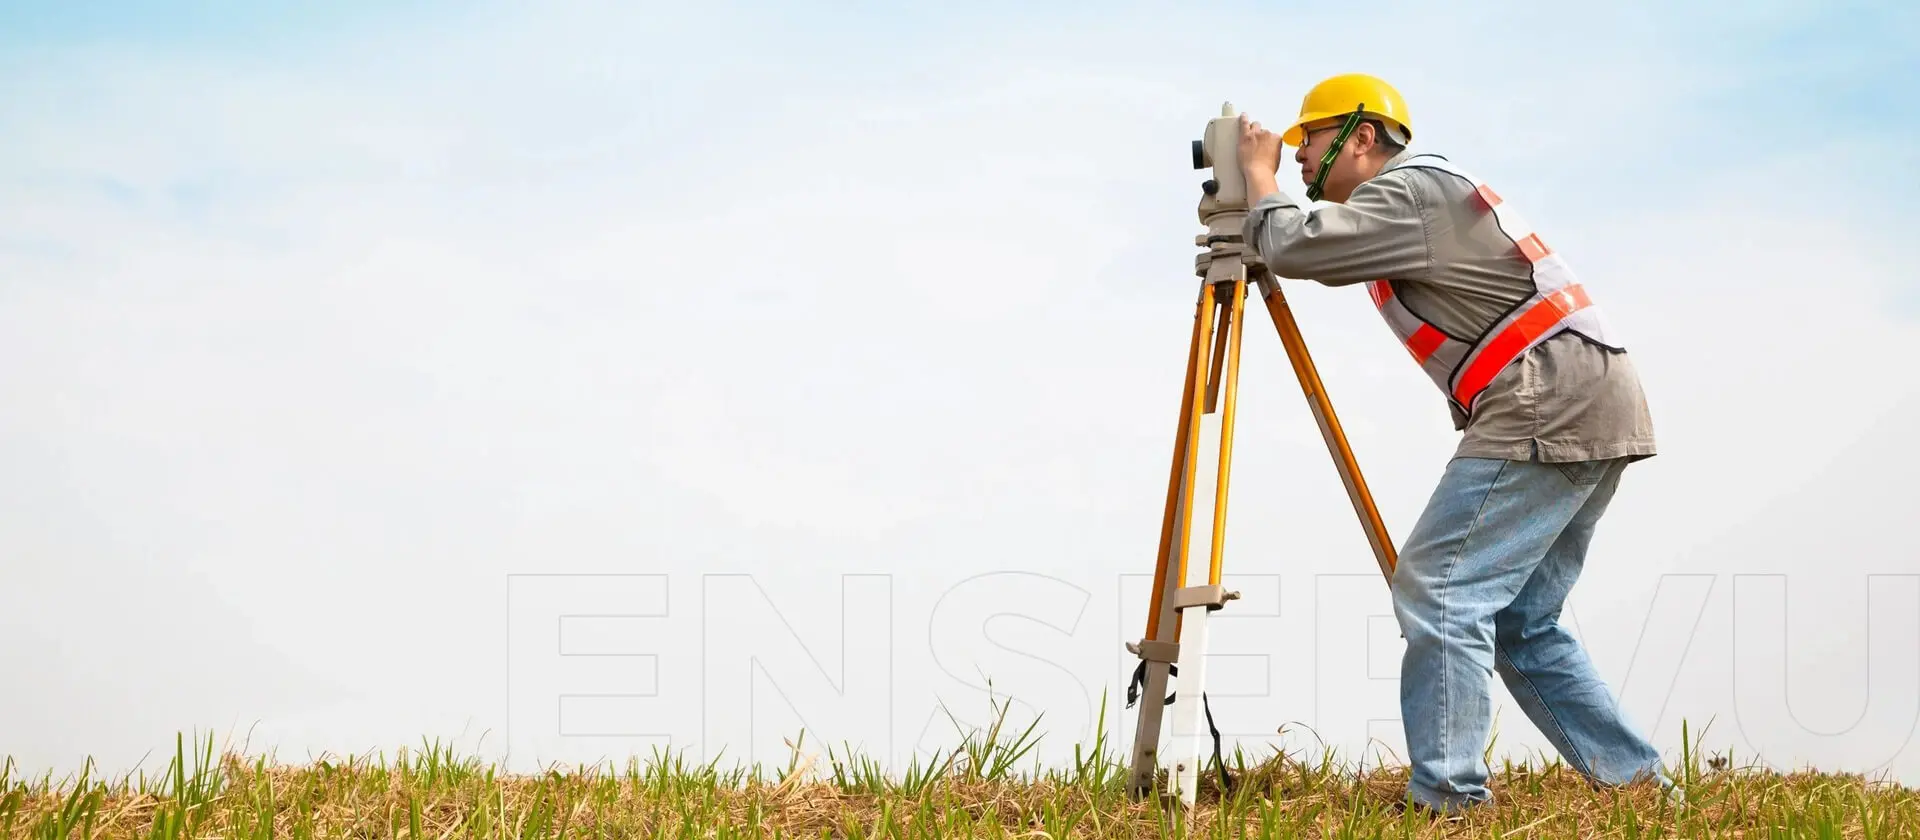 A man in yellow hard hat using a surveying equipment.